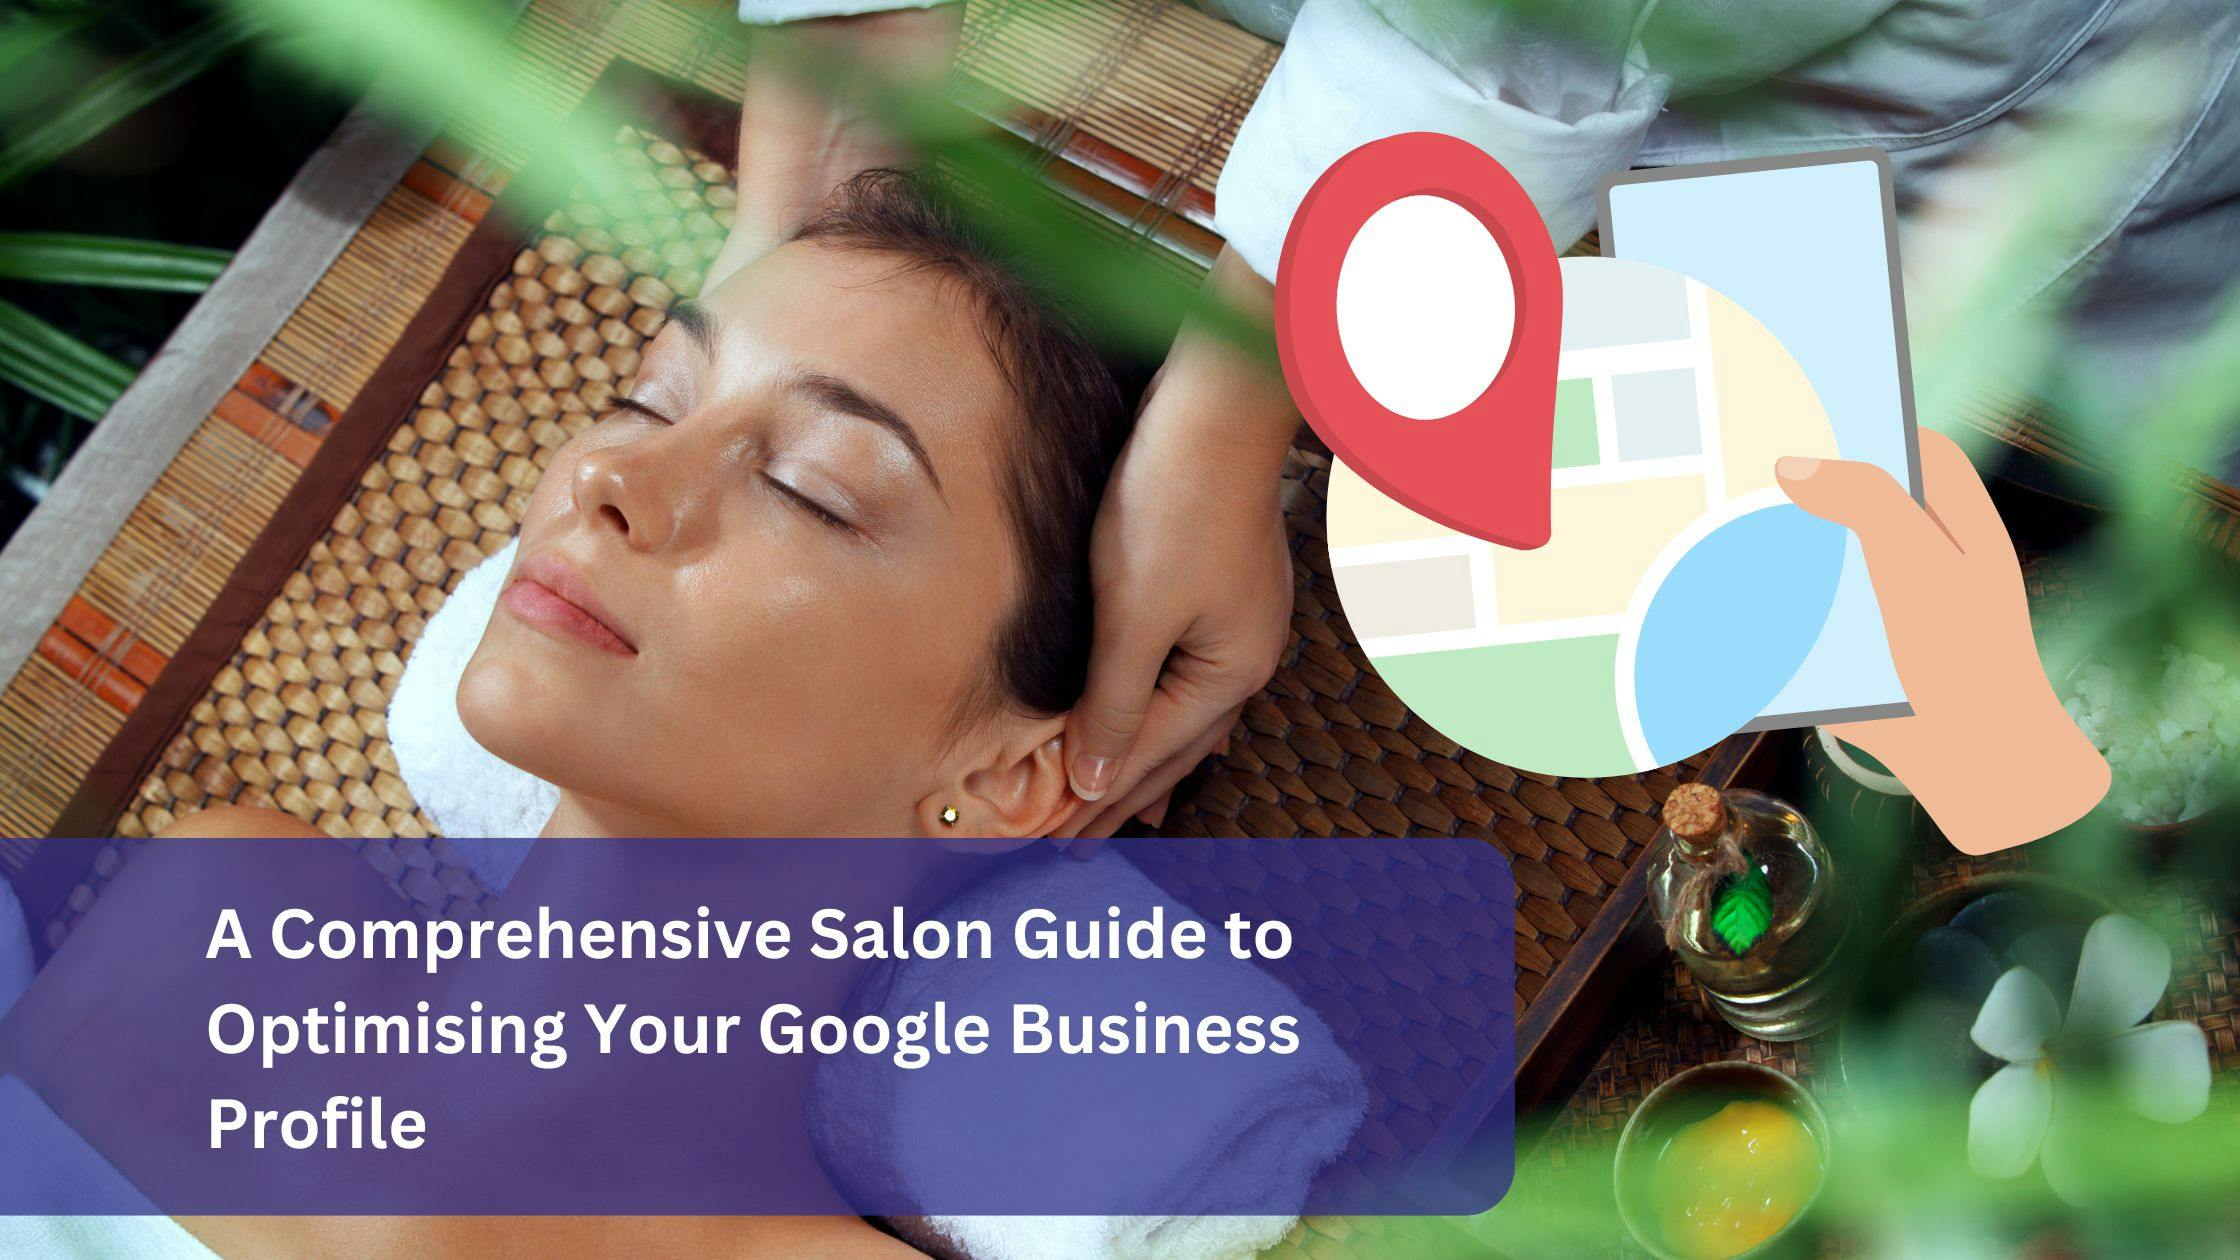 A Comprehensive Salon Guide to Optimising Your Google Business Profile